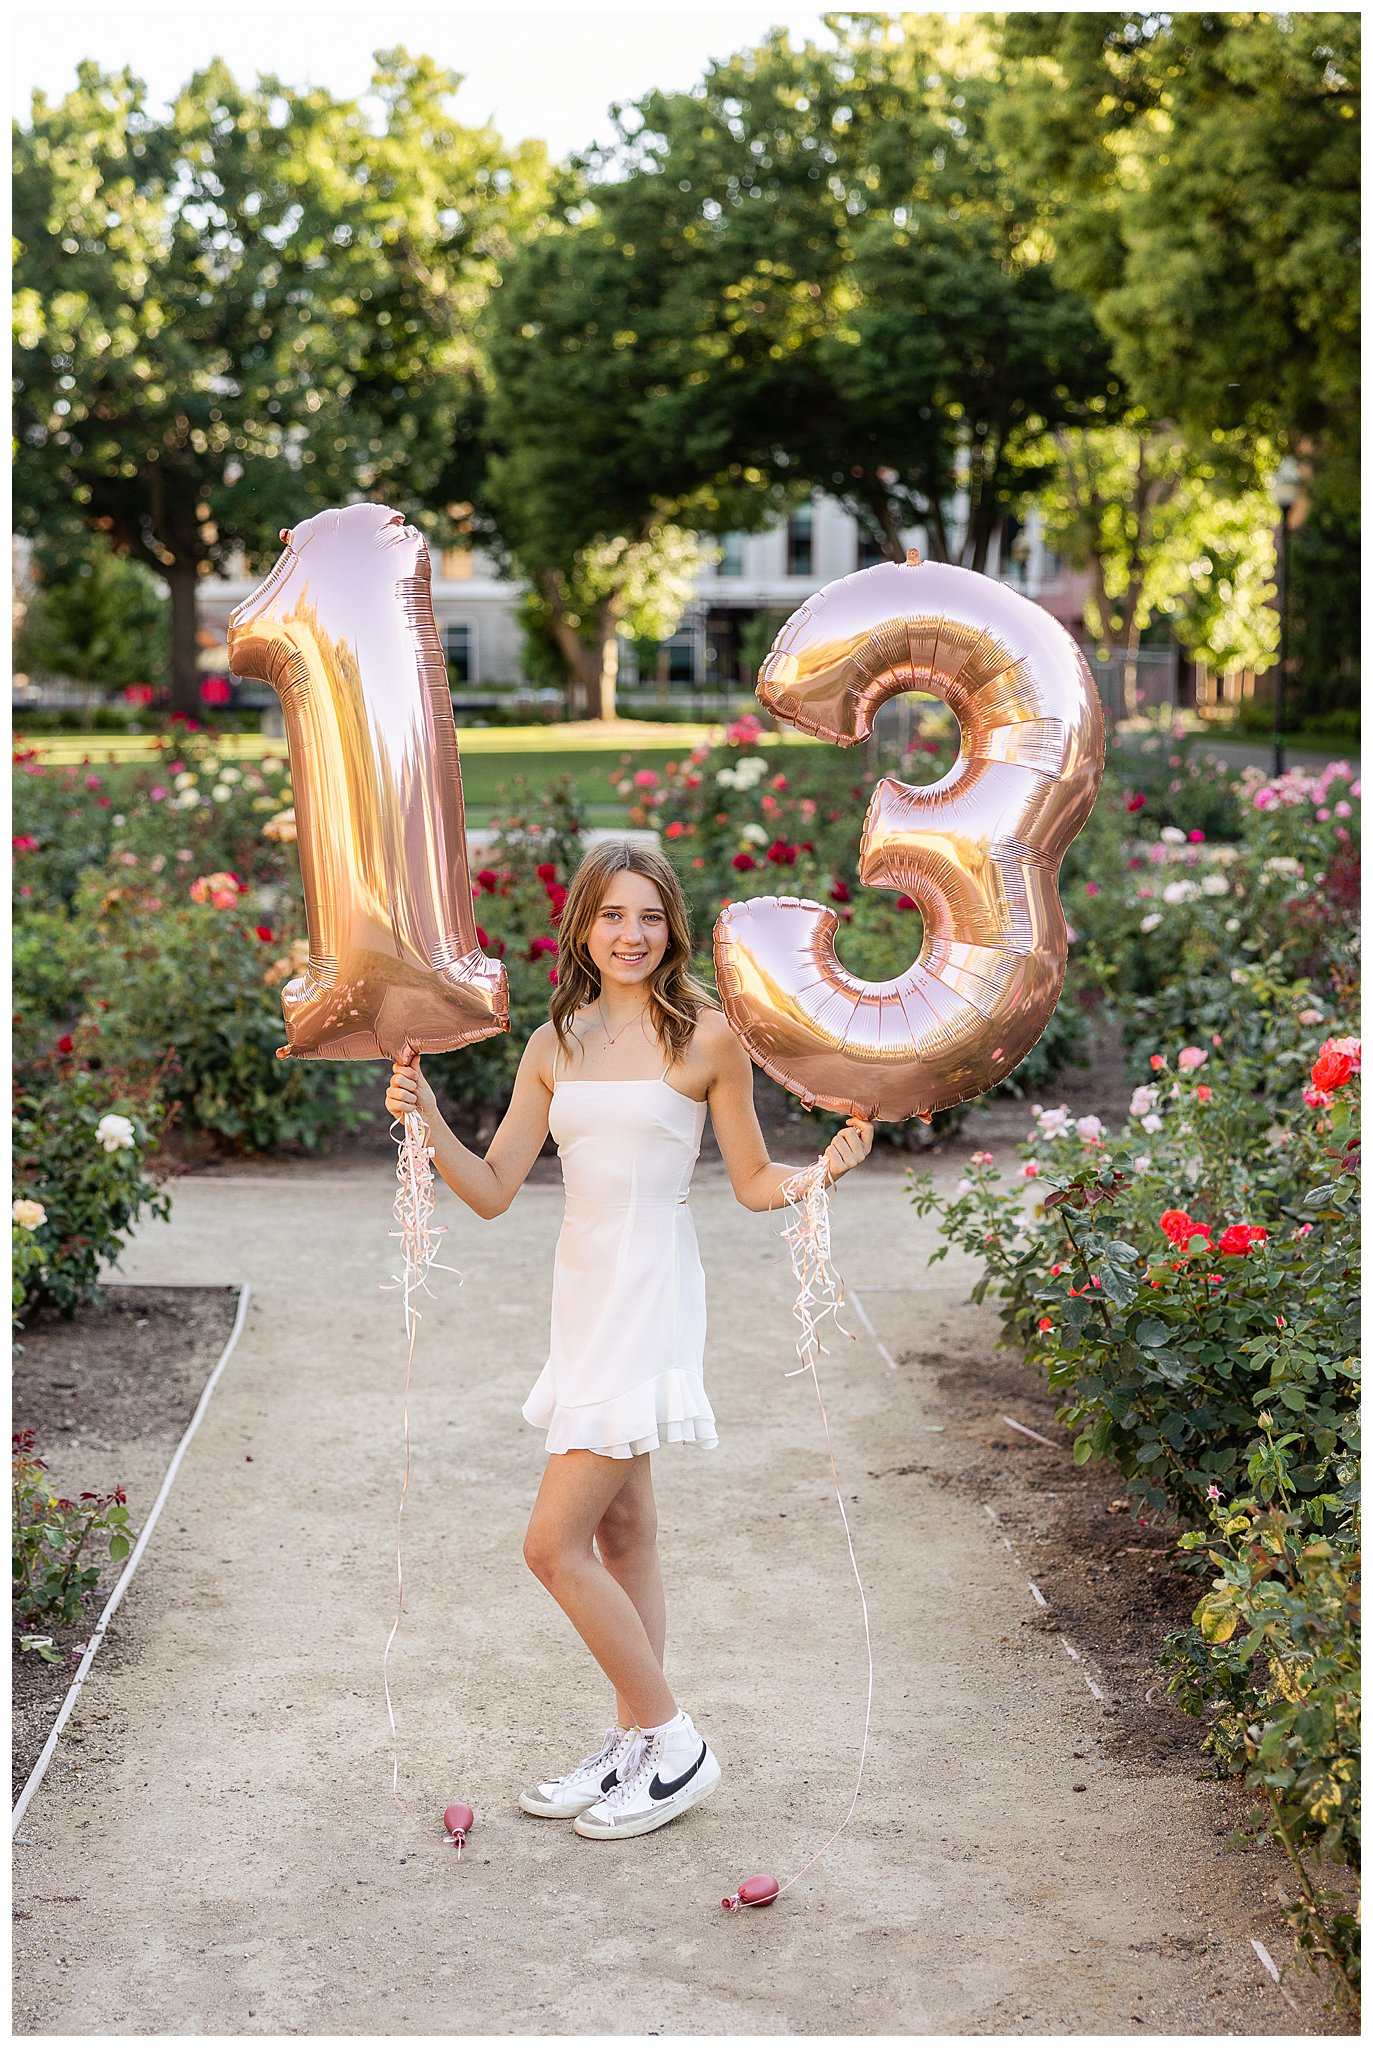 Birthday Session with Balloons in Rose Garden CSU, Chico | Carys